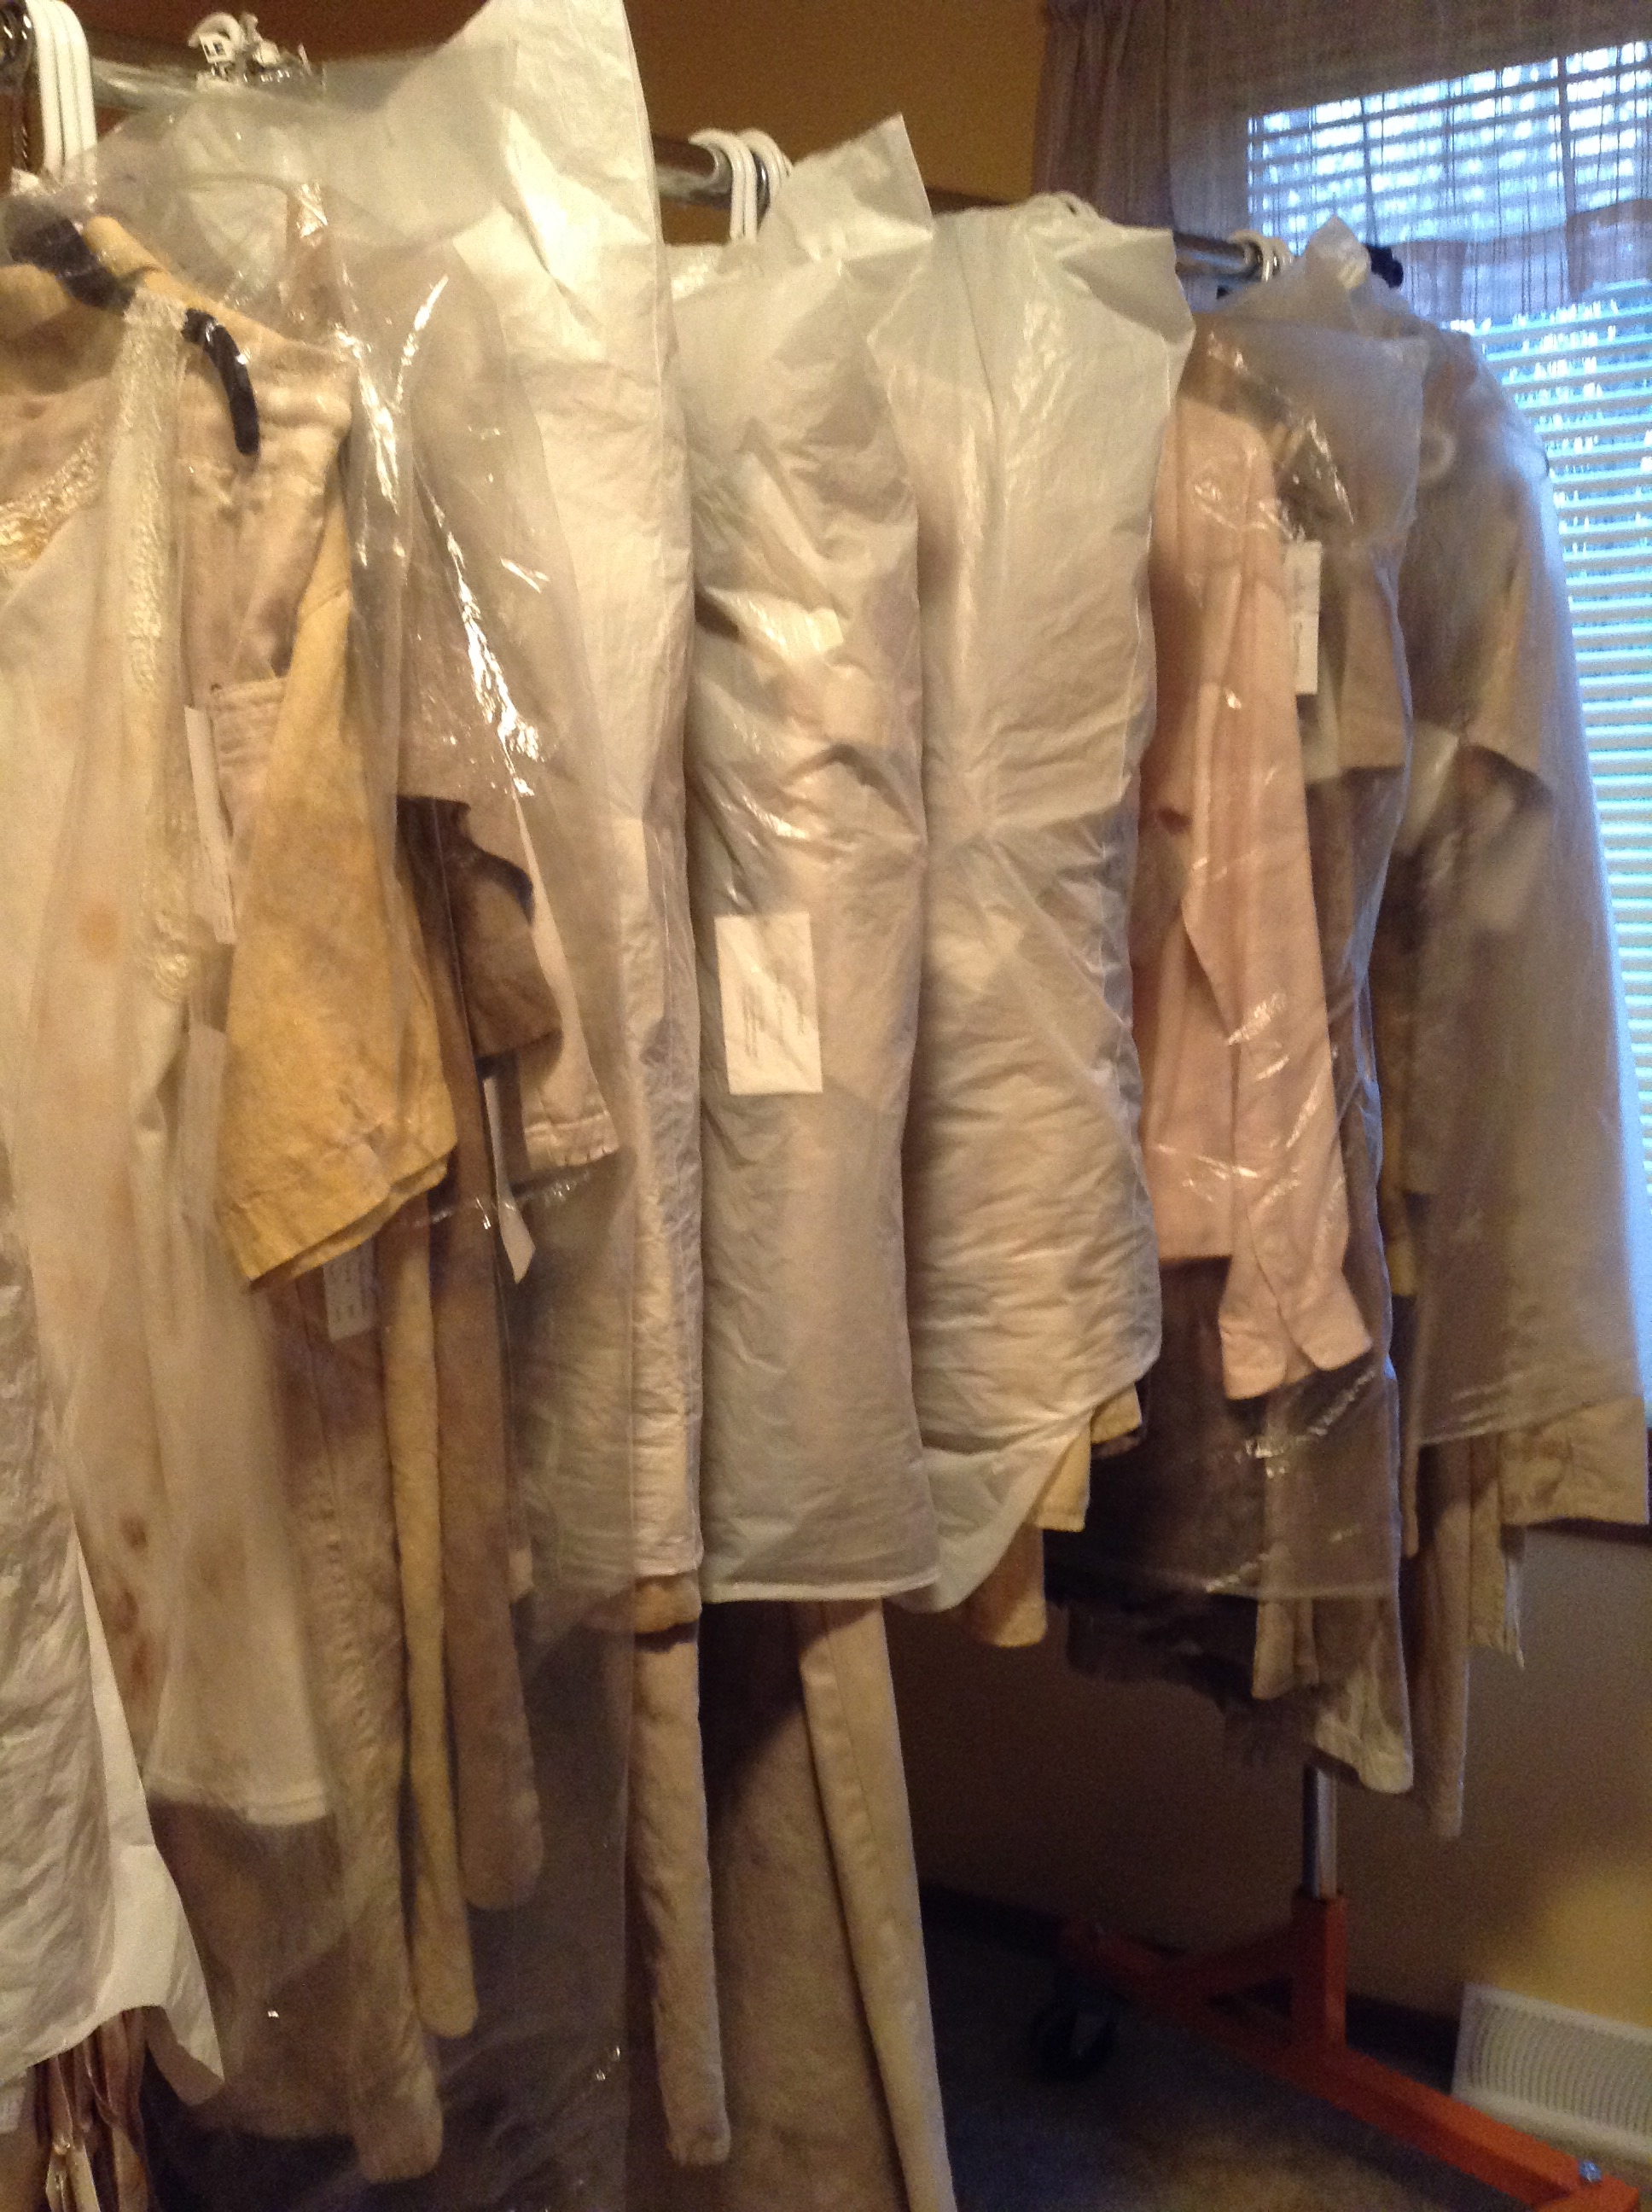 Rack of naturally dyed clothing ready for Wildfloer Show.